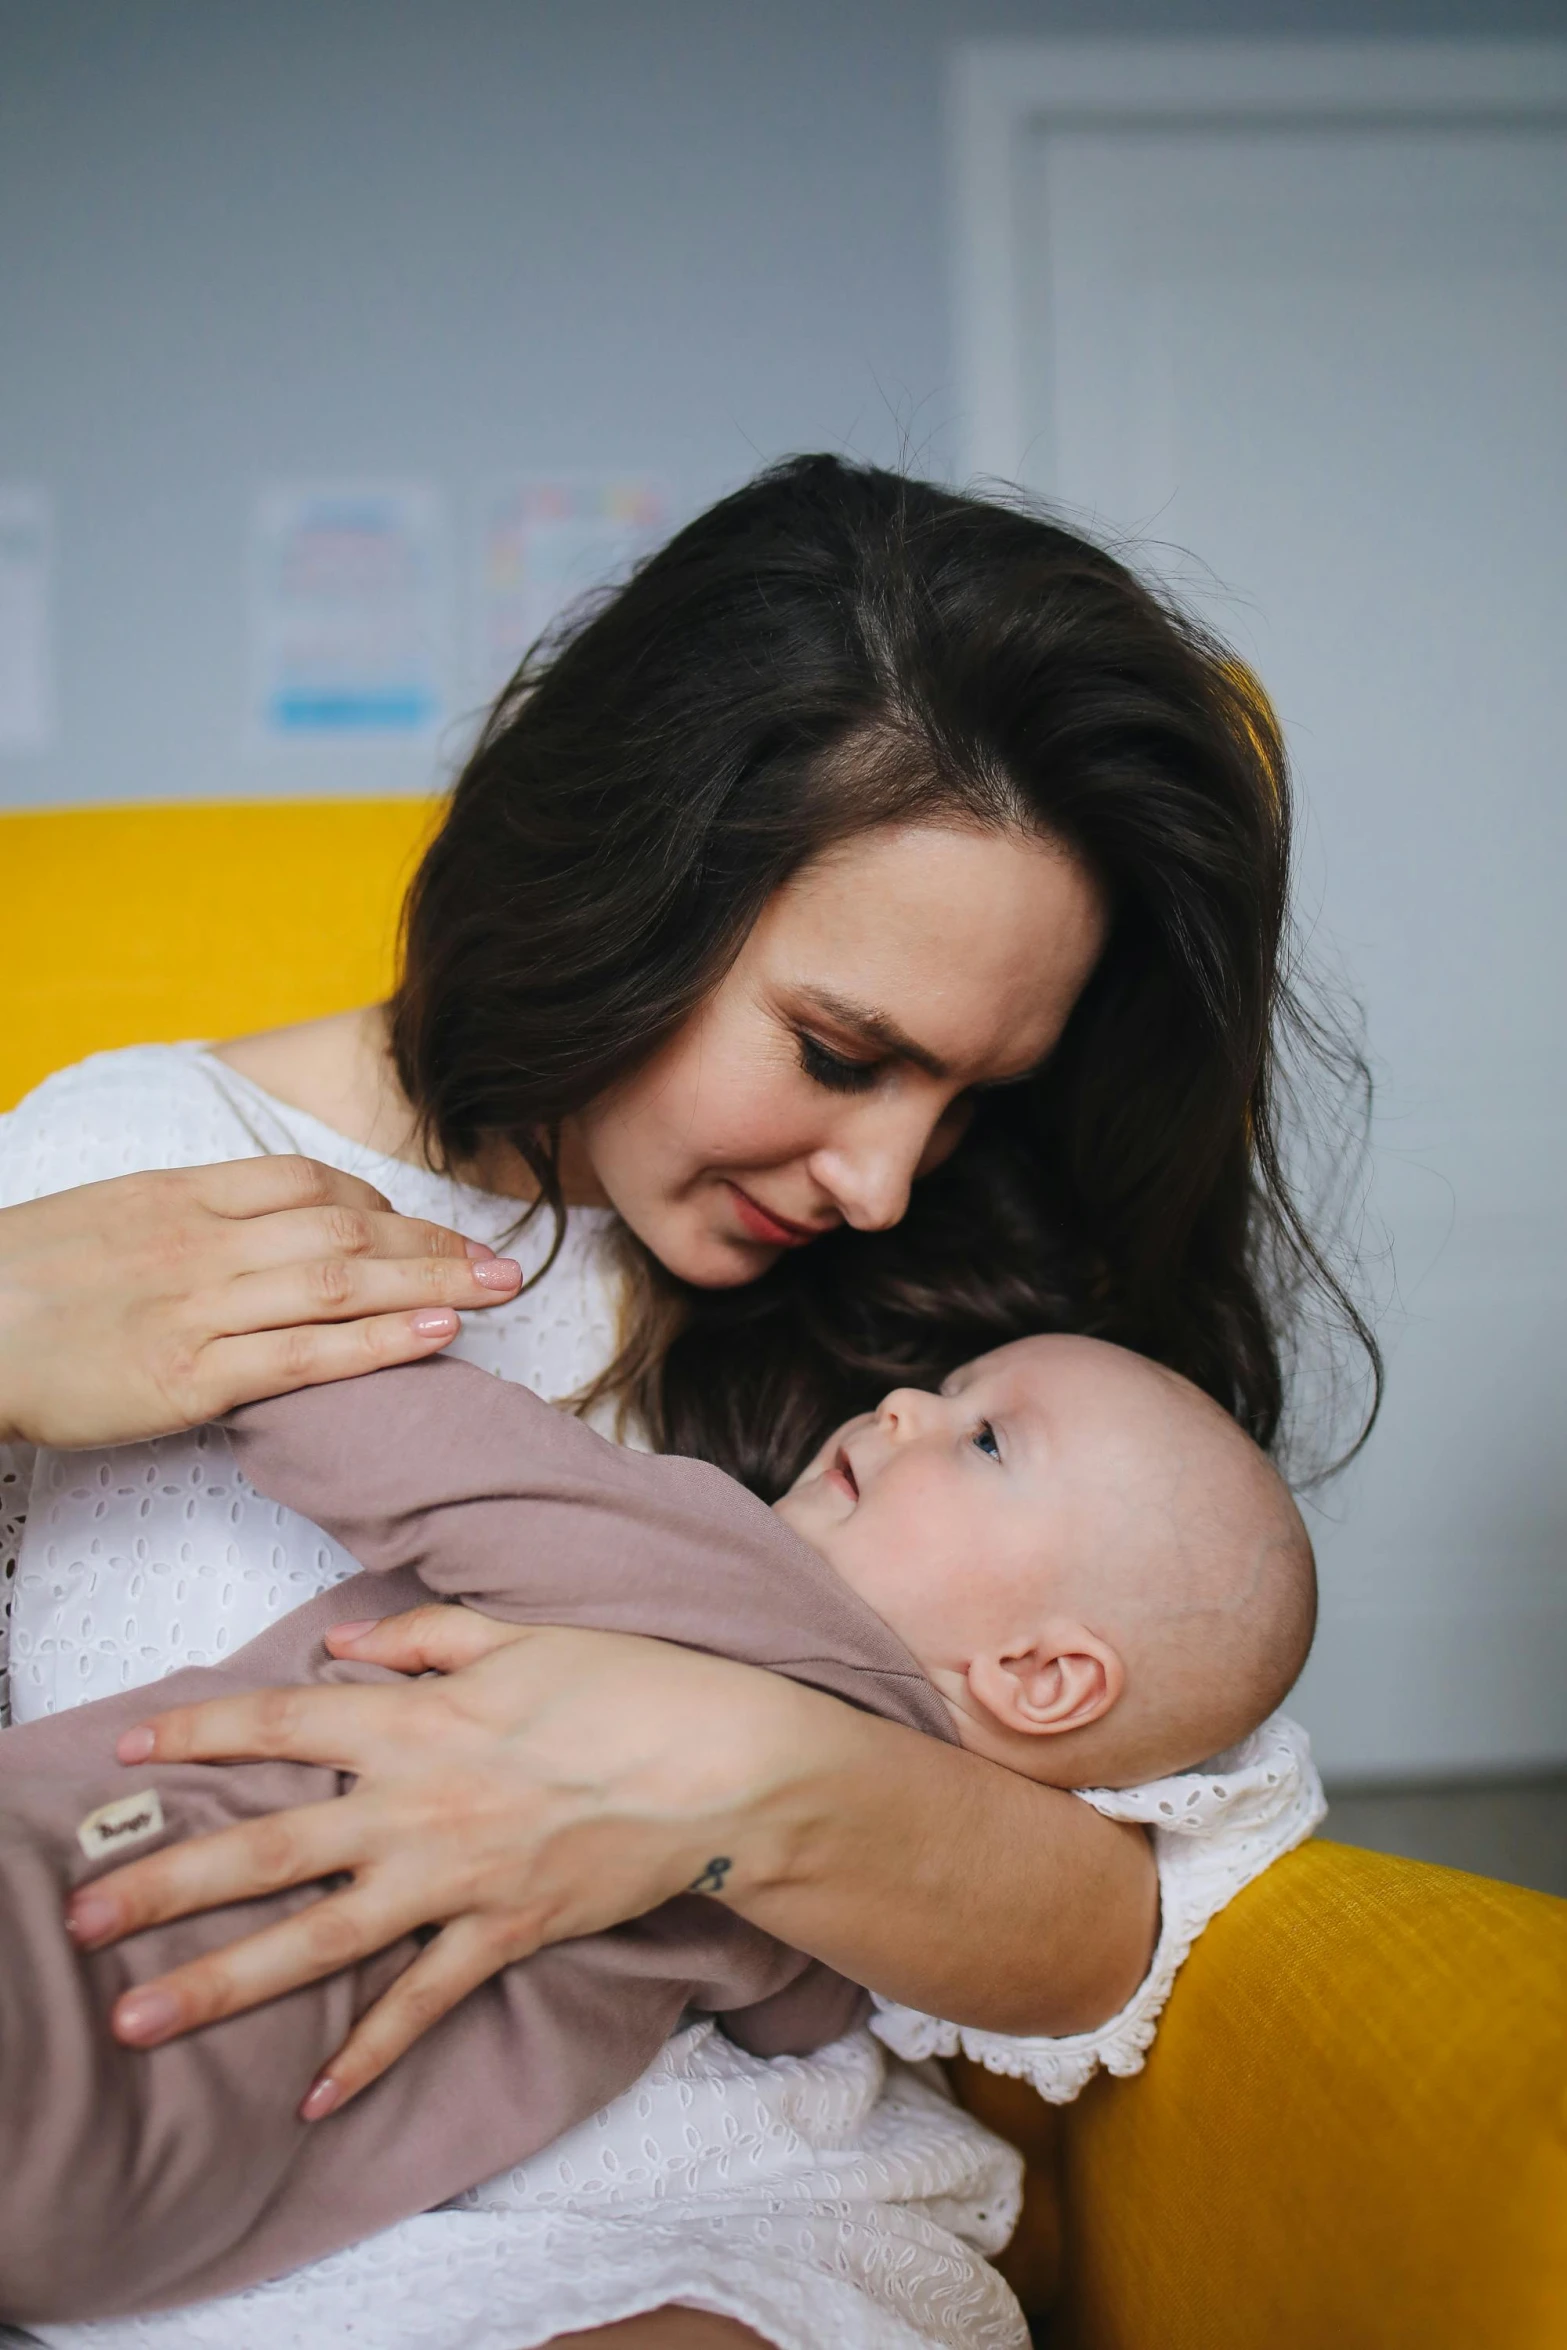 a woman holding a baby in her arms, by Adam Marczyński, pexels, incoherents, resting on chest, brunette, anna nikonova aka newmilky, high quality image